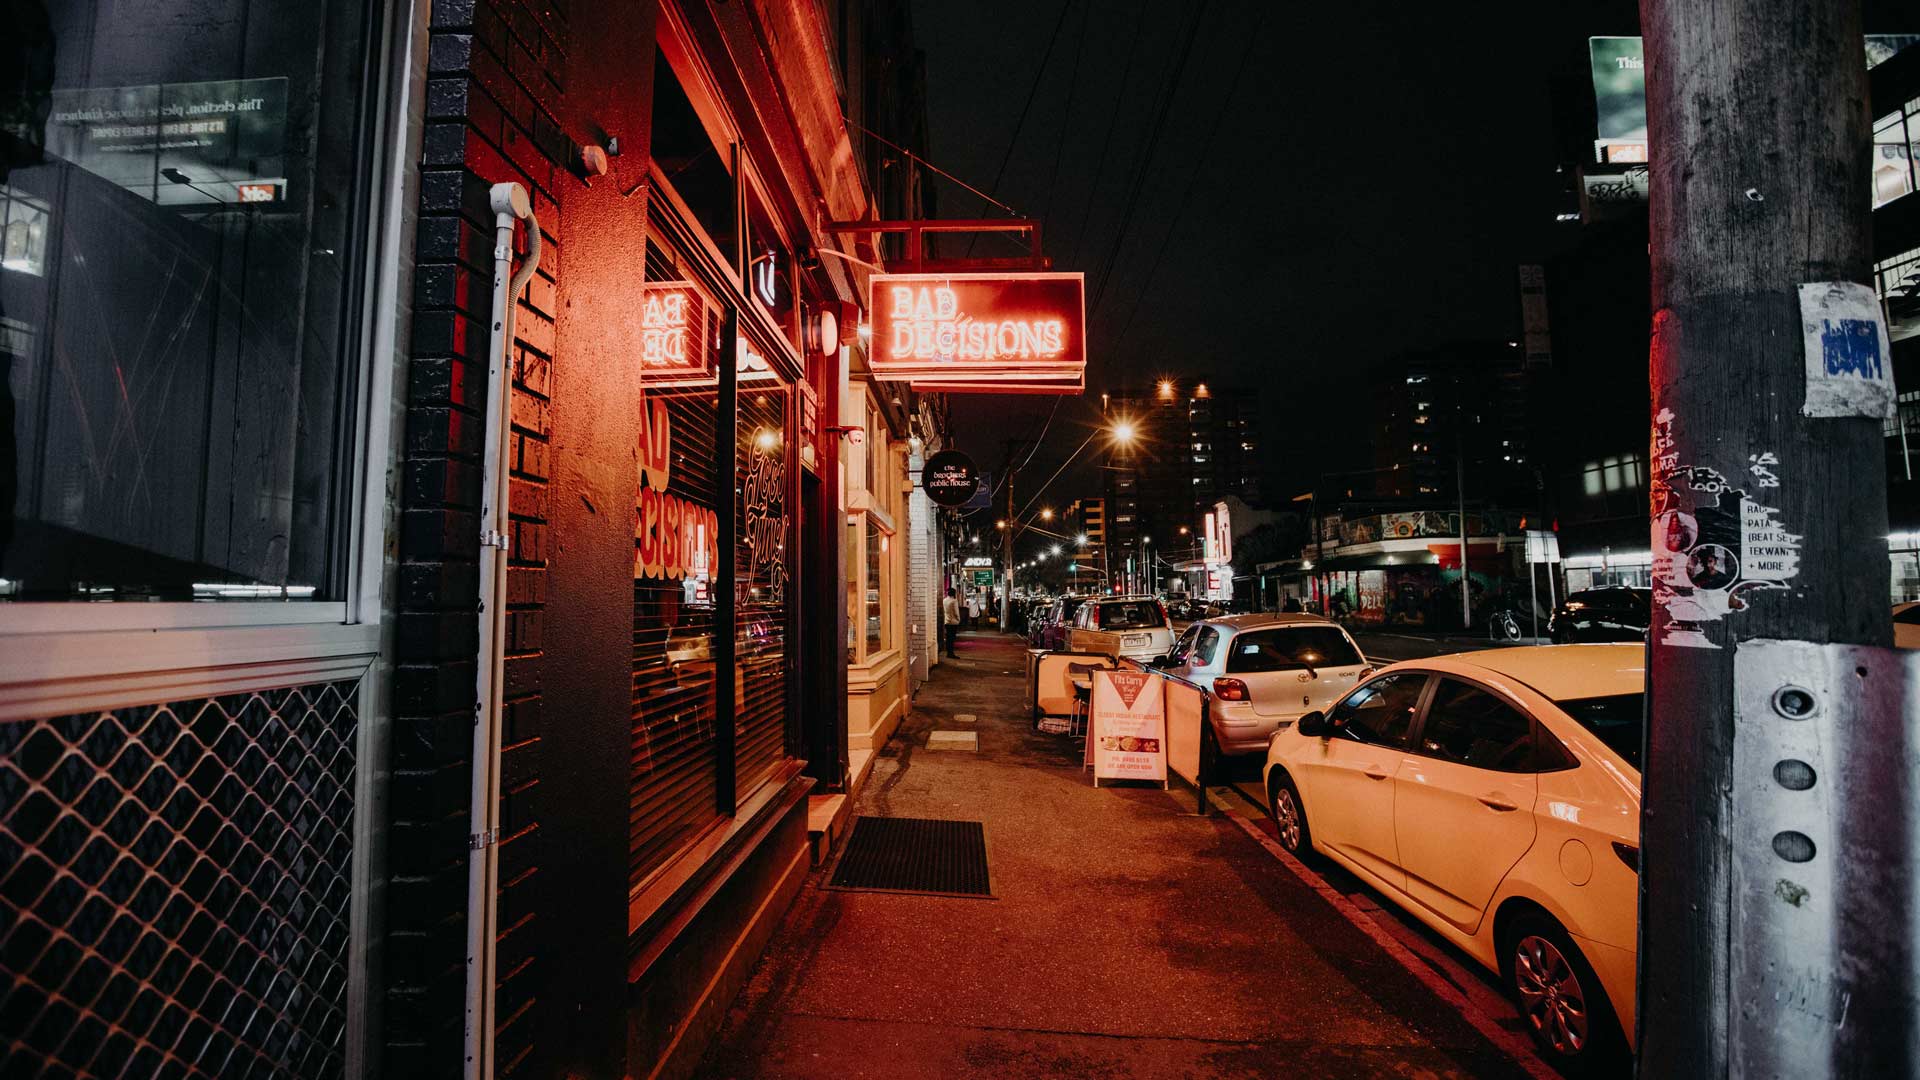 Bad Decisions Is Fitzroy's New Neon-Lit Late-Night Drinking Den